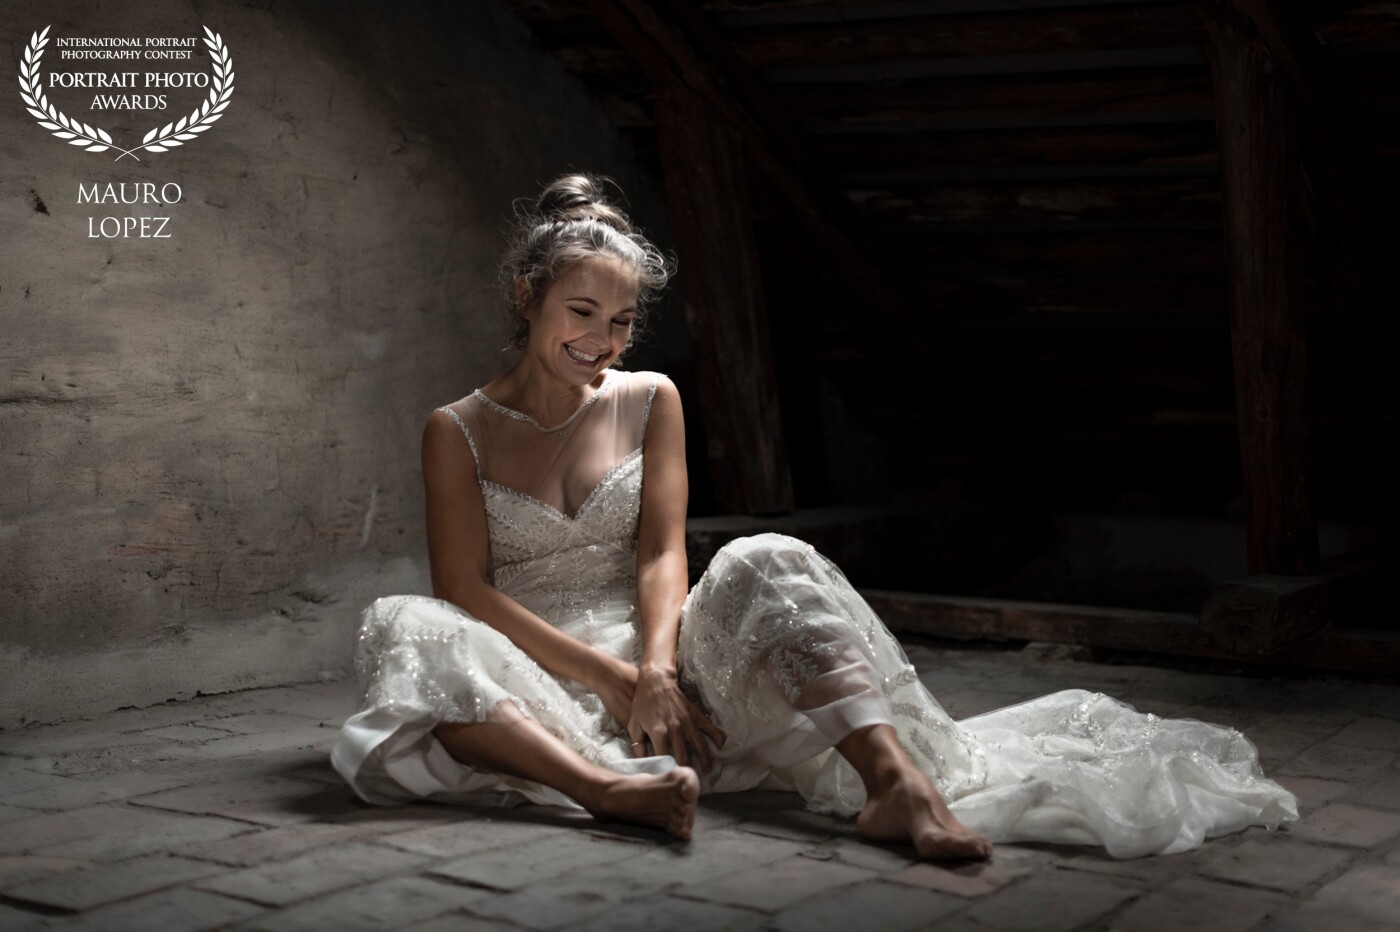 Catching emotions and memories with my friend Mia who also is a well-known make-up artist. The Location is in her attic in Stockholm city. The dress is from her wedding.